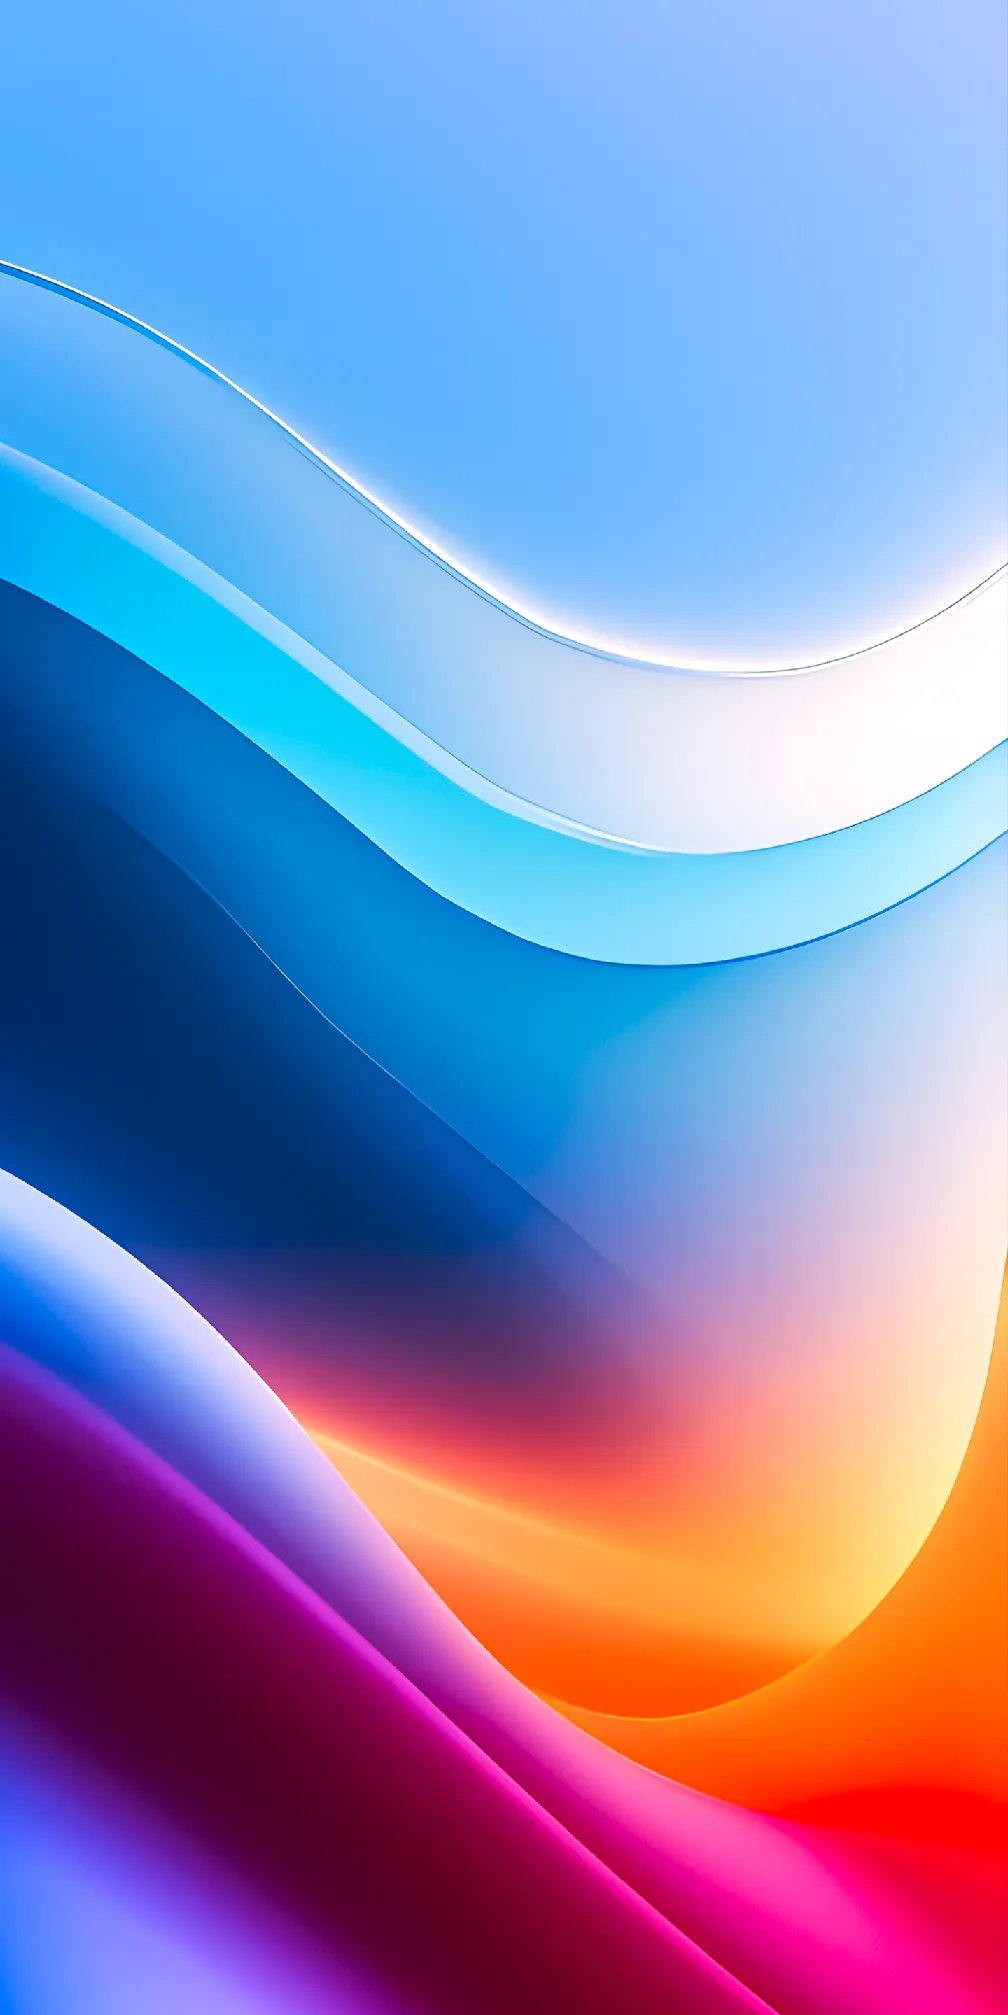 Abstract iPhone wallpaper - 070